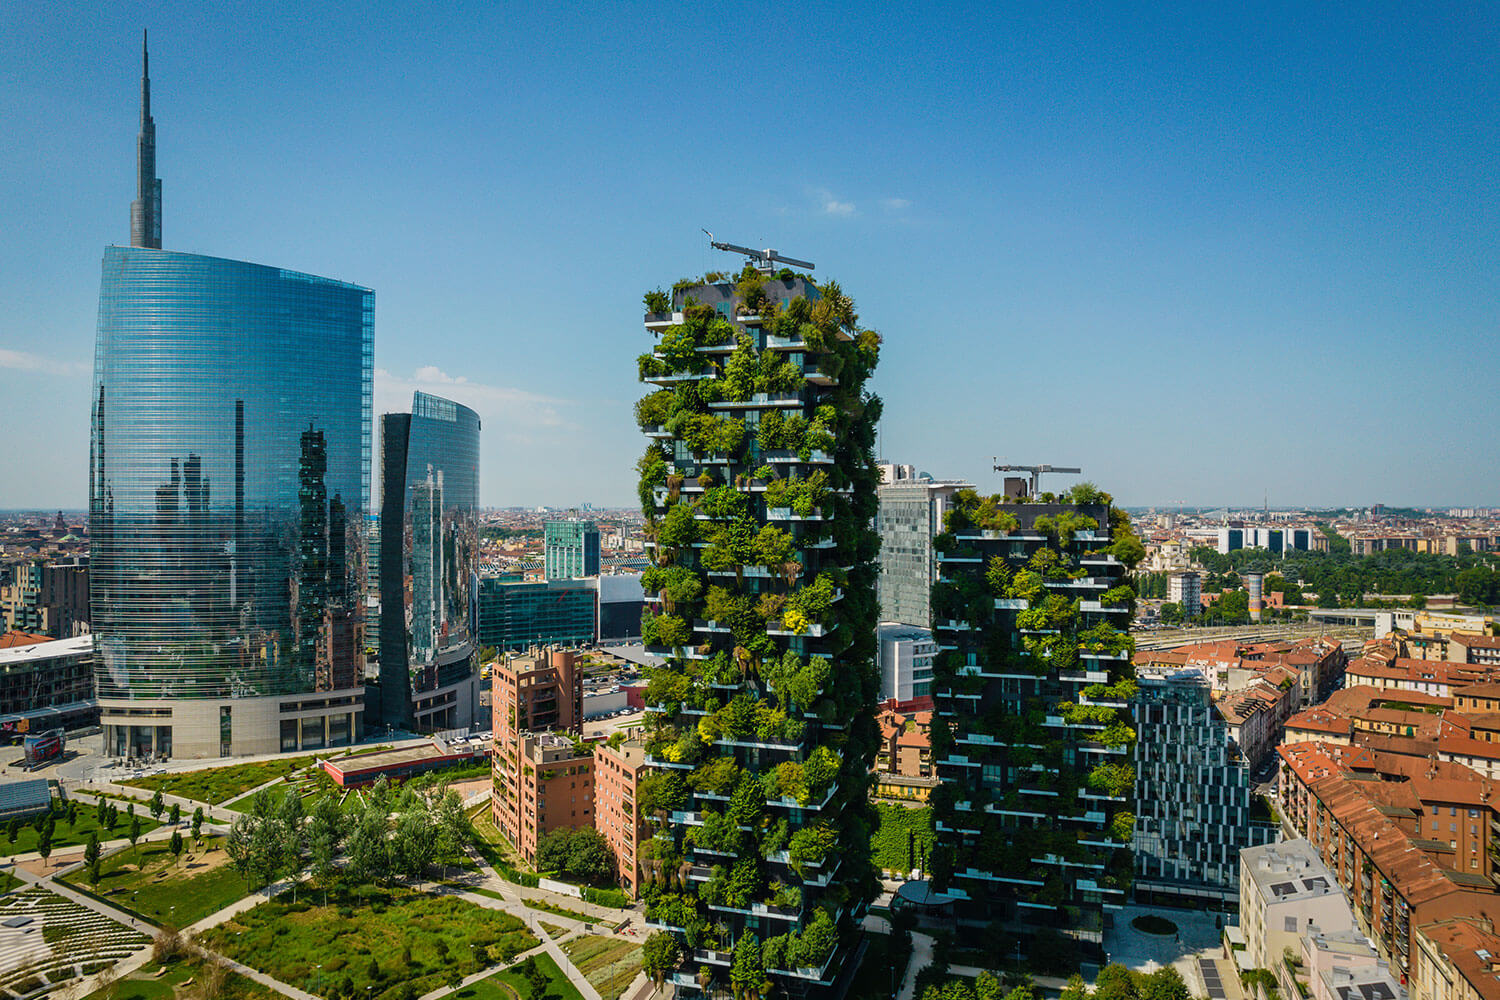 Aerial photo of Bosco Verticale, Vertical Forest, in Milan, showing residential buildings with many trees and other plants in balconies